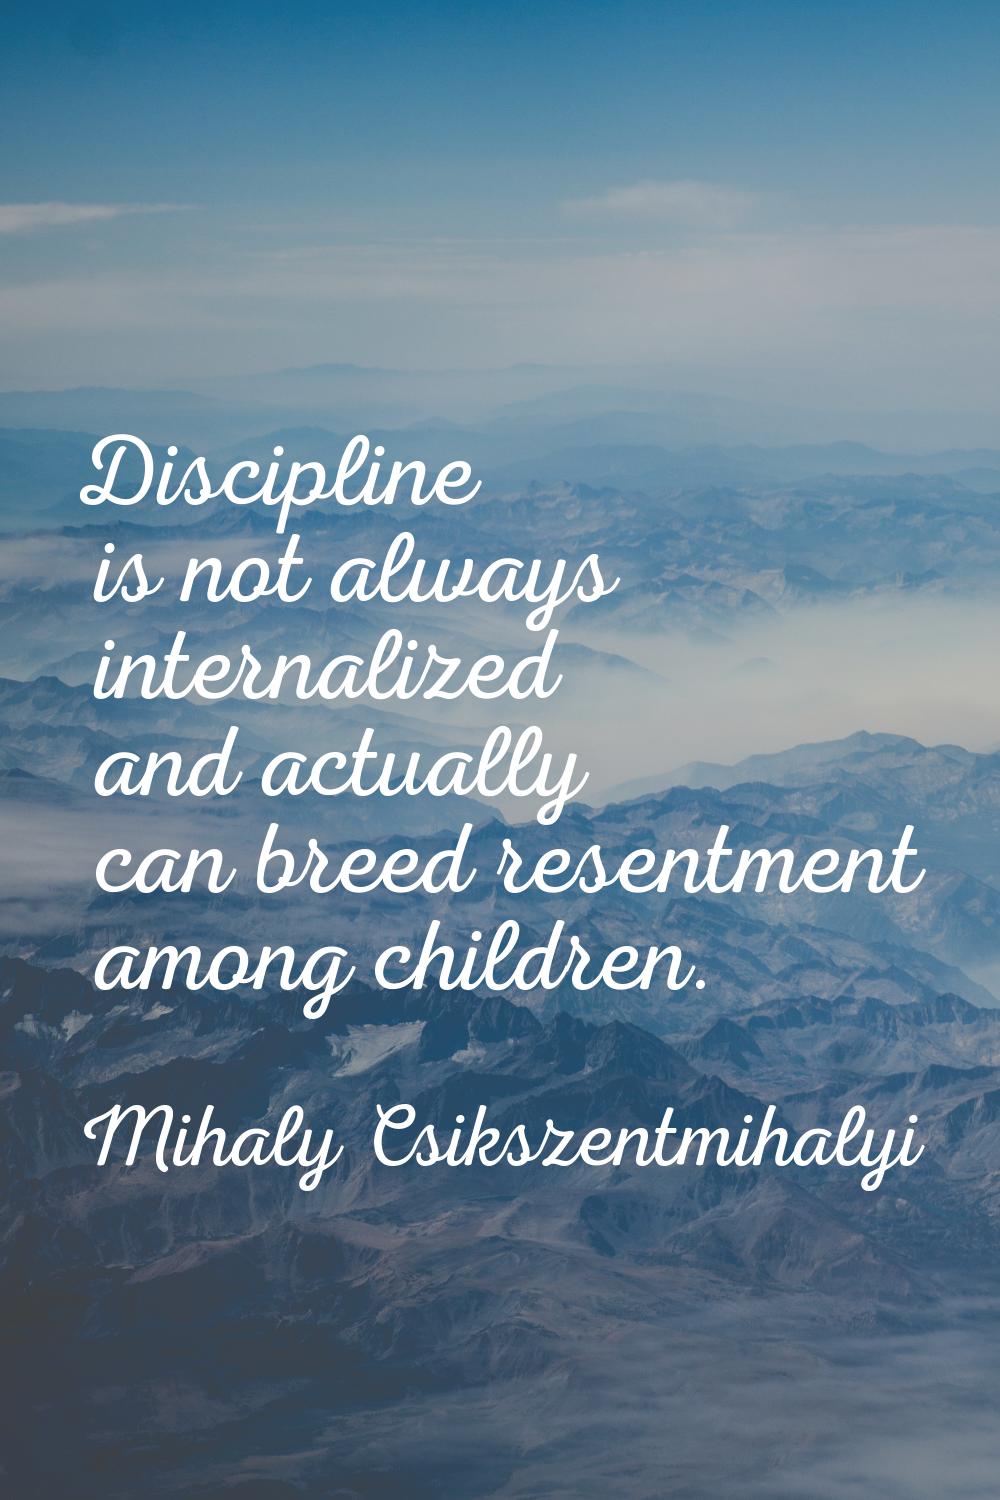 Discipline is not always internalized and actually can breed resentment among children.